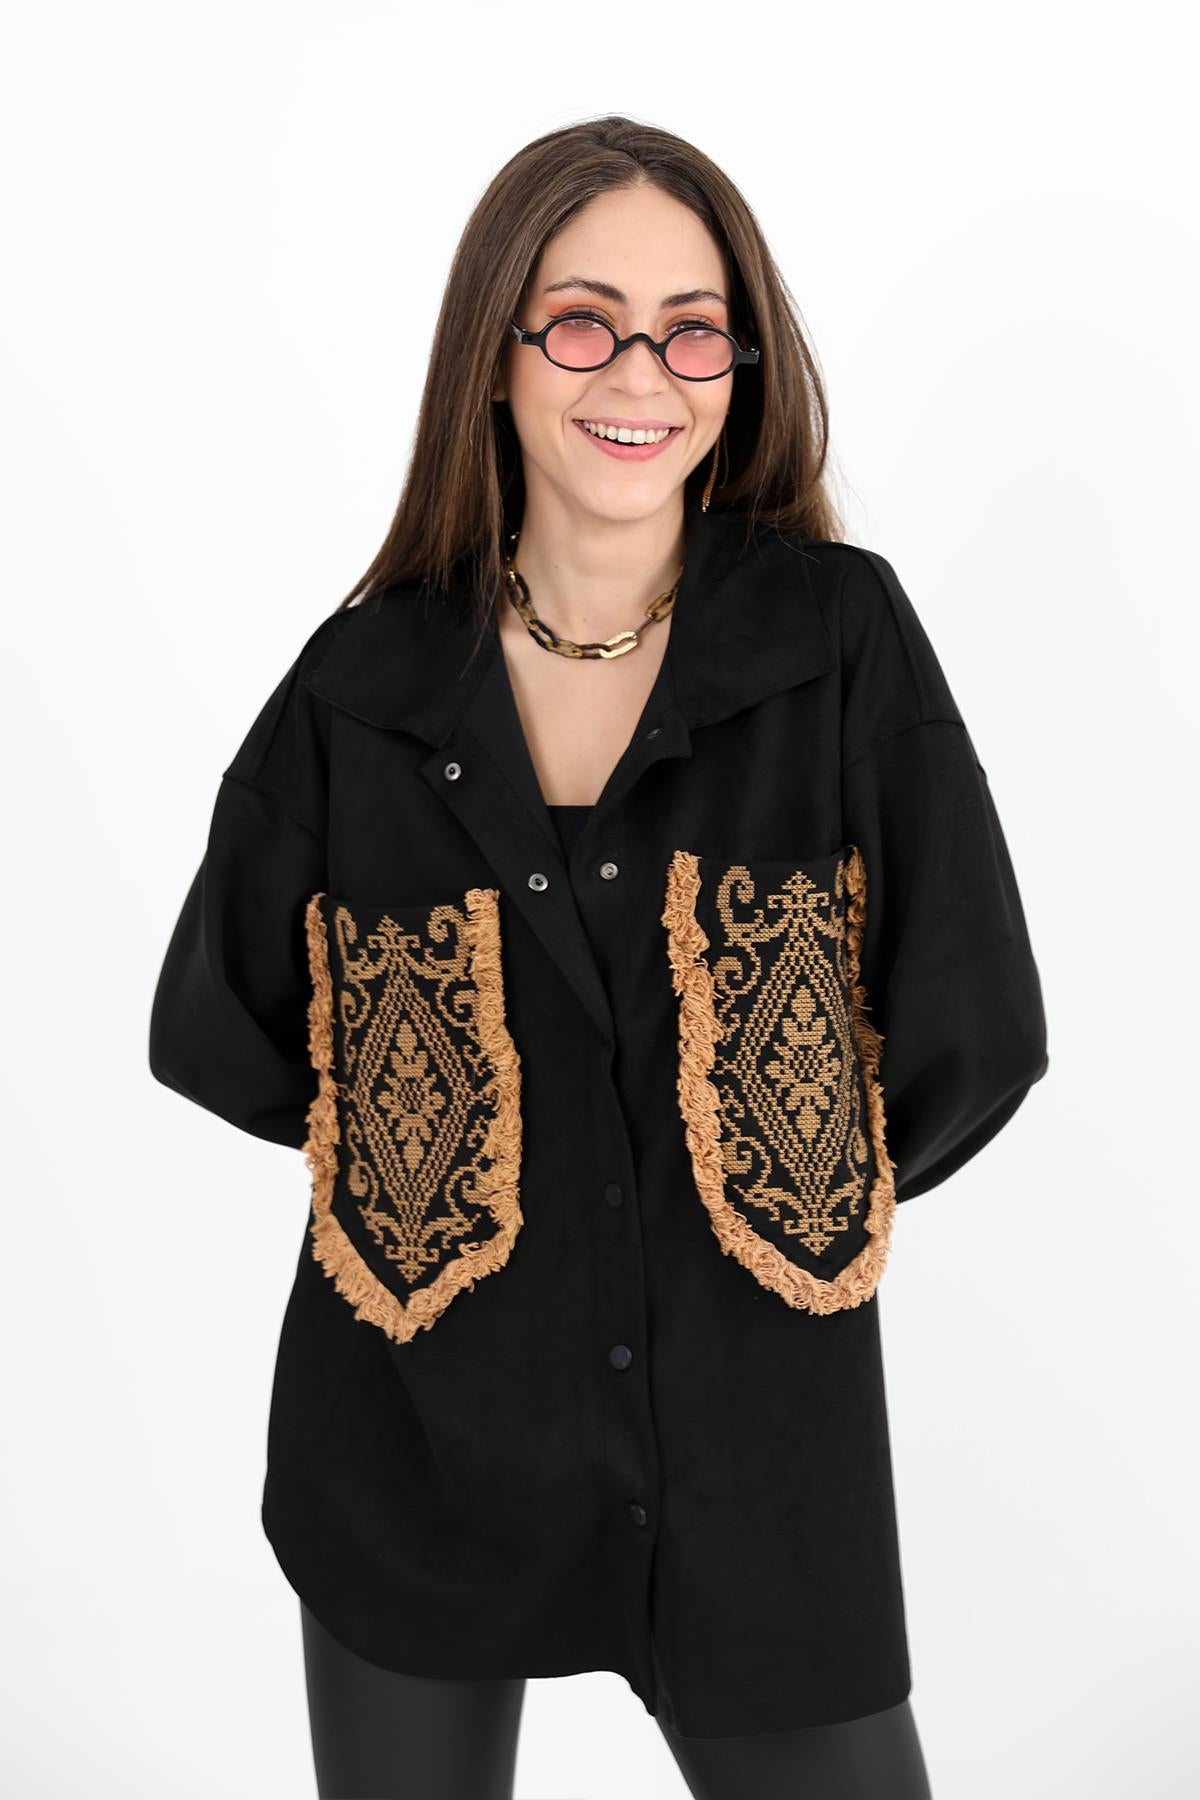 Women's Shirt Pocket Tasseled Embroidered Suede - Black - STREETMODE™